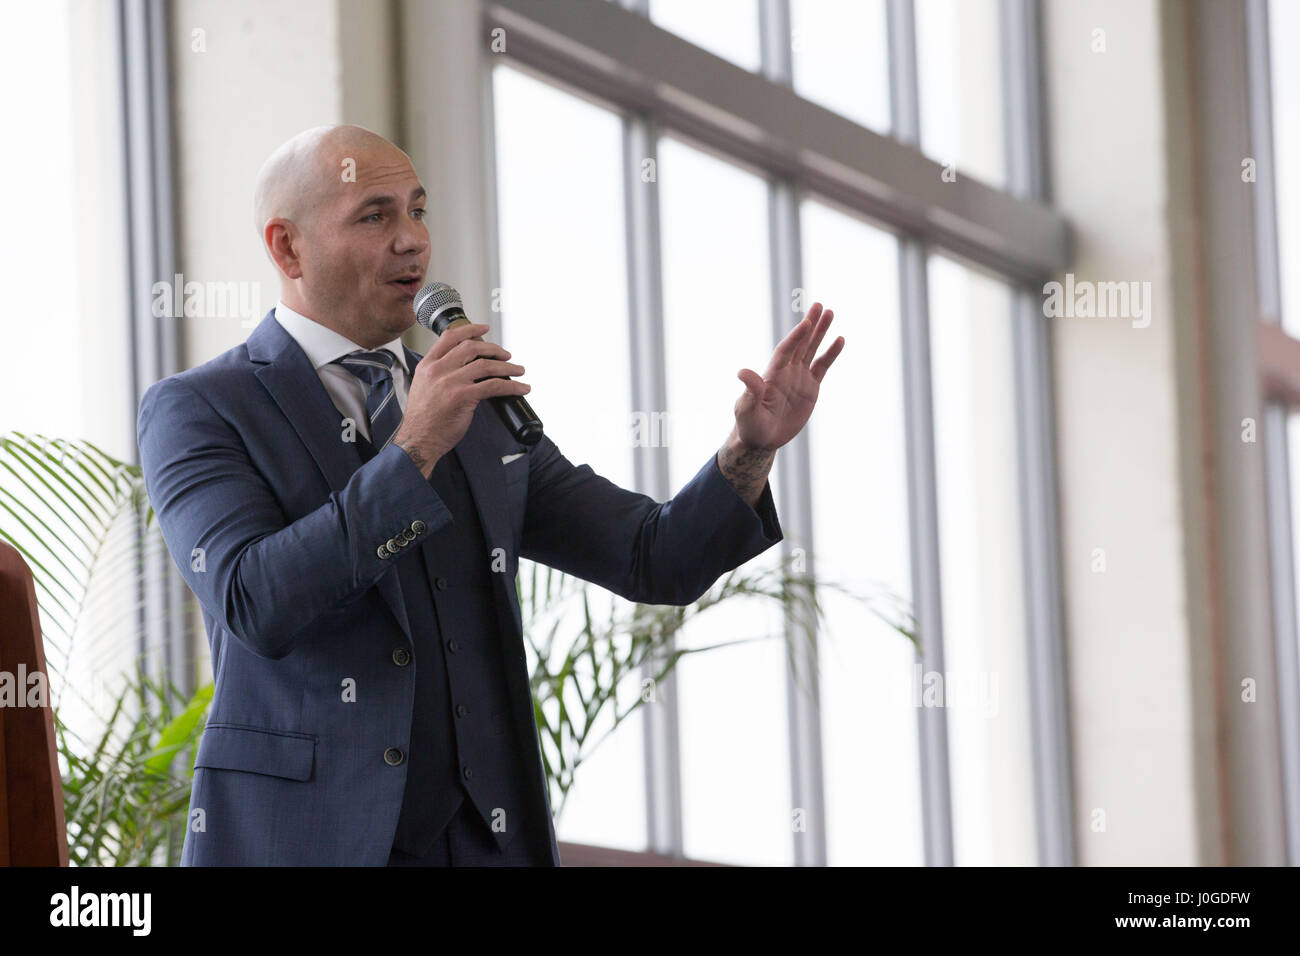 Rapper Pitbull introduces U.S. Secretary of Education Betsy DeVos at the SLAM  charter school he supports in Little Havana April 6, 2017 in Miami, Florida. The controversial education secretary made several stops including her first visit to a public university, a private christian school and the charter school. Stock Photo